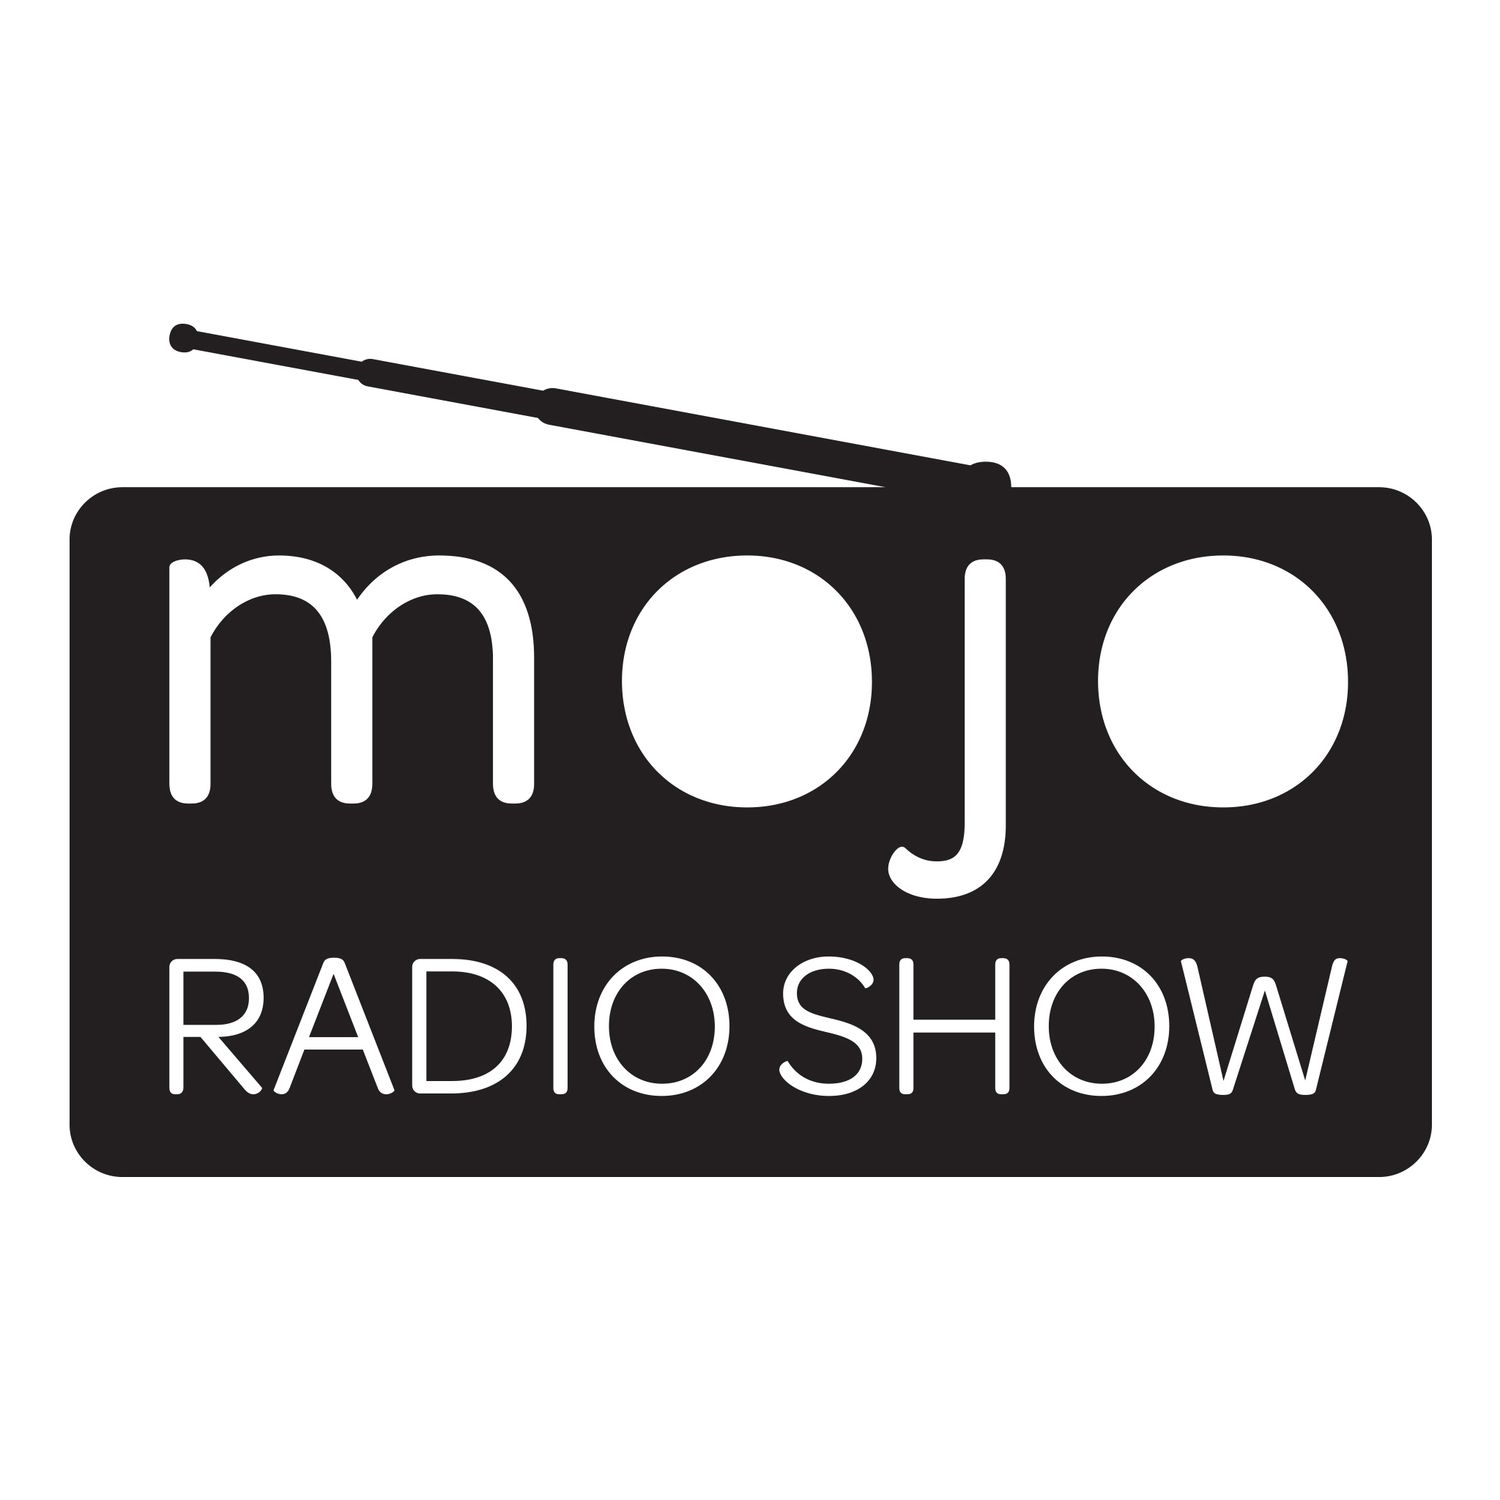 The Mojo Radio Show EP 187: How To Be A Great Leader or Coach Thru Your Questions - Michael Bungay Stanier